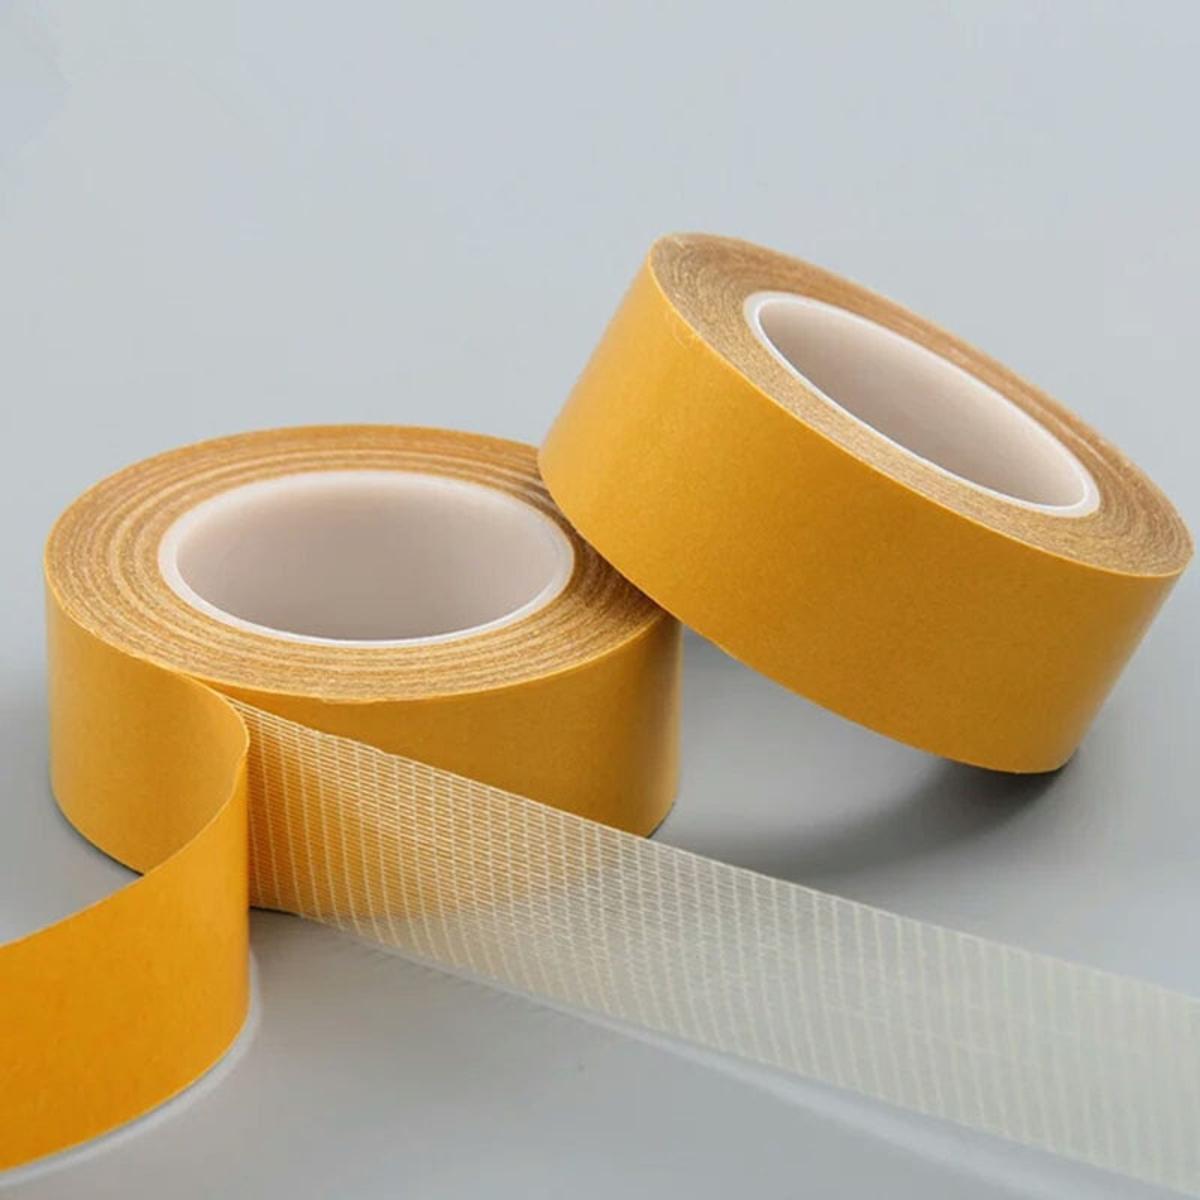 Nano Magic Tape Double Sided Tape Transparent No Trace Reusable Waterproof